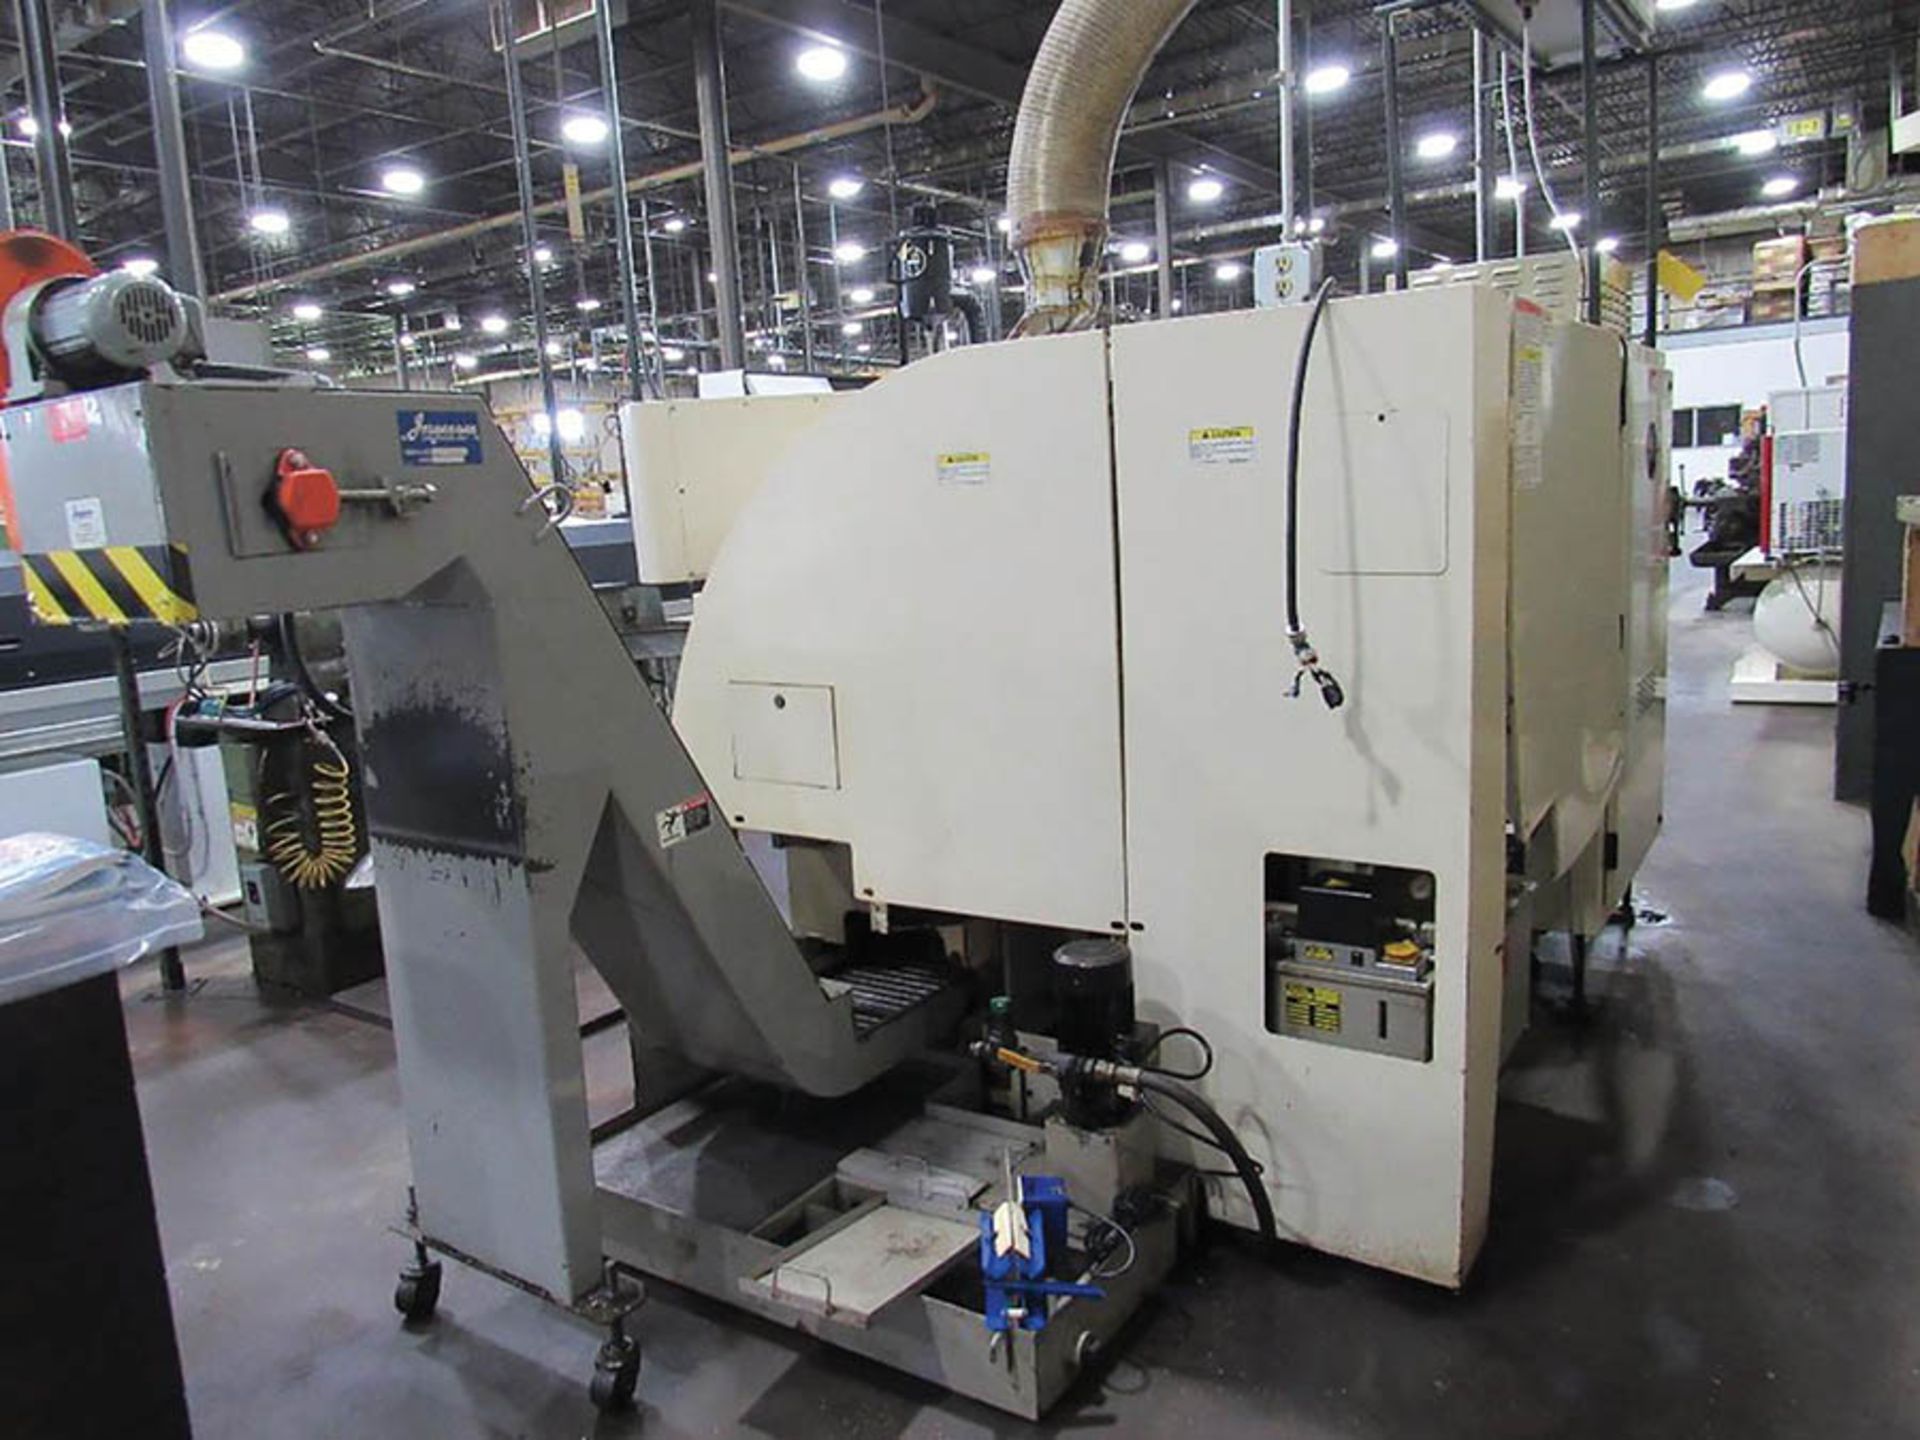 OKUMA CROWN CNC TURNING CENTER MODEL 762S-BB, S/N 0284, 12-POSITION TURRET, 3.15'' SPINDLE BORE, - Image 5 of 8